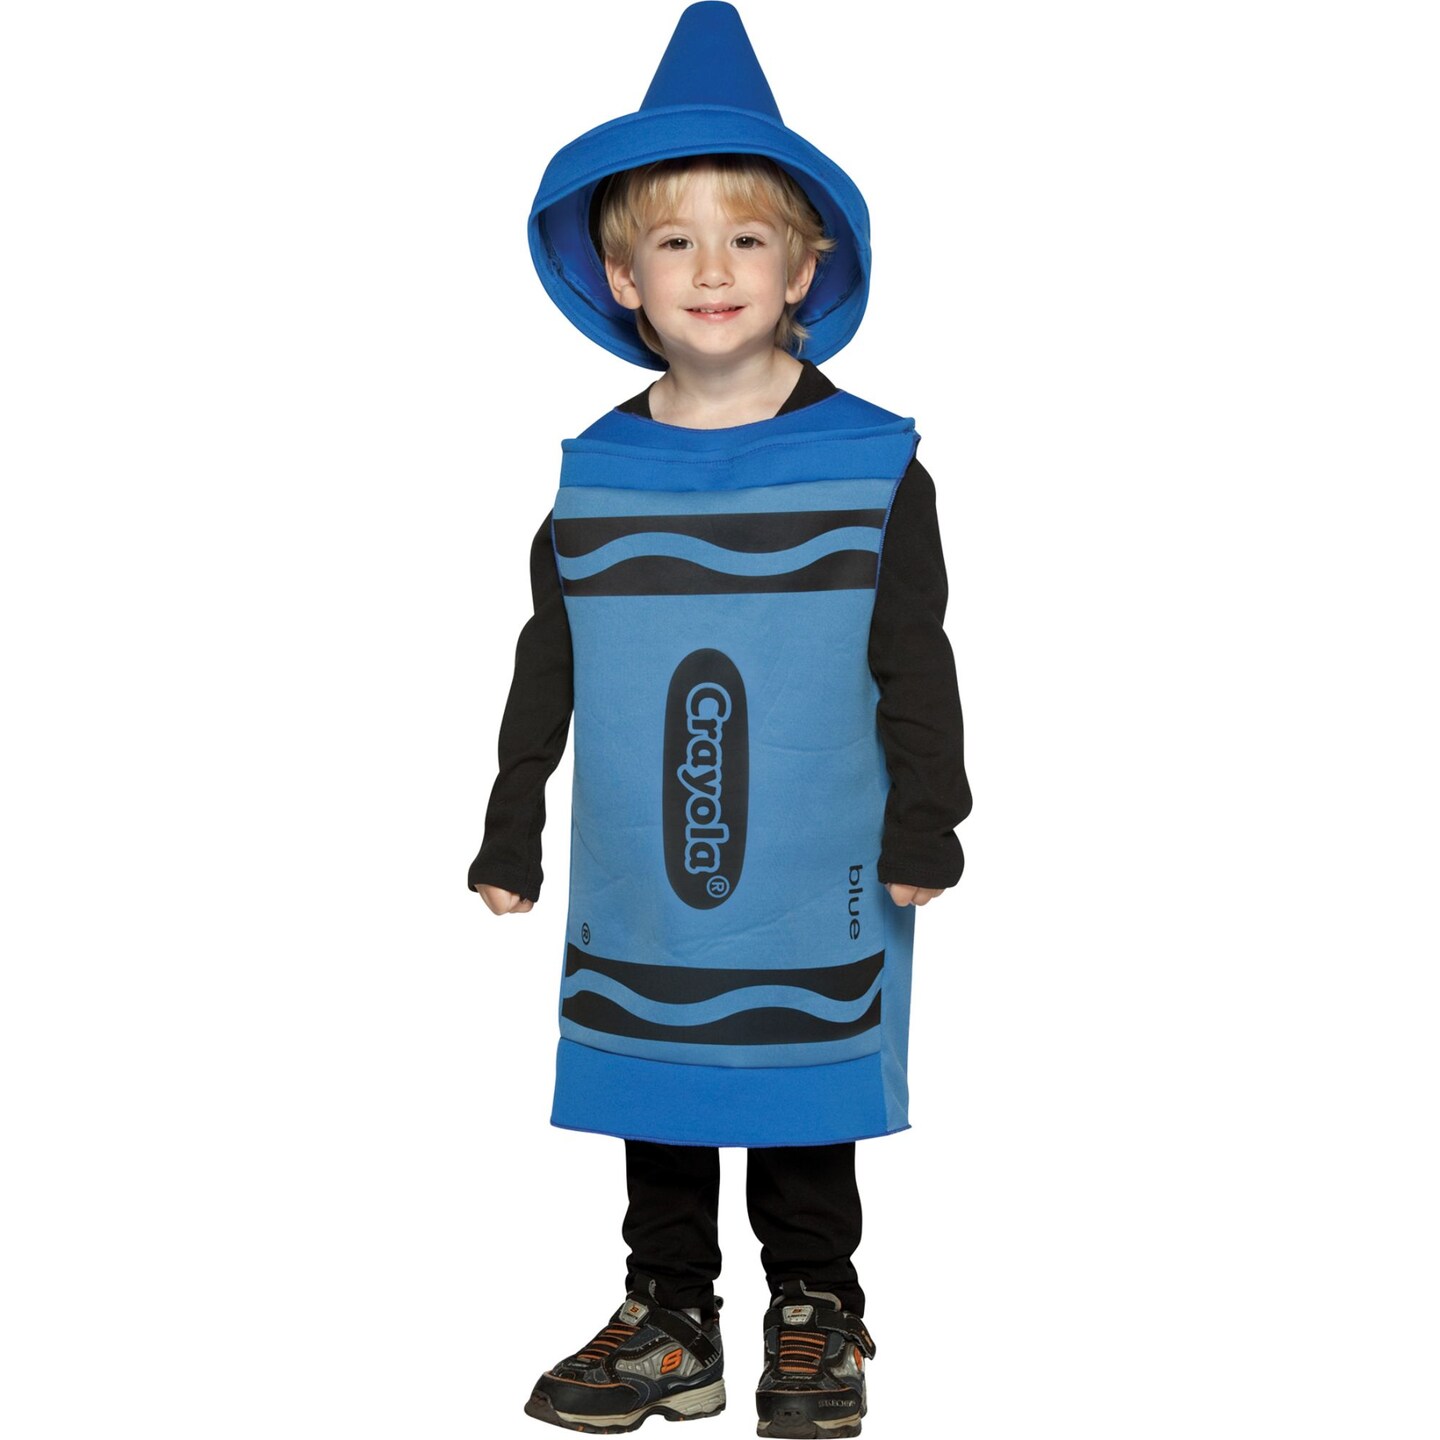 The Costume Center Blue and Black Crayola Toddler Halloween Costume